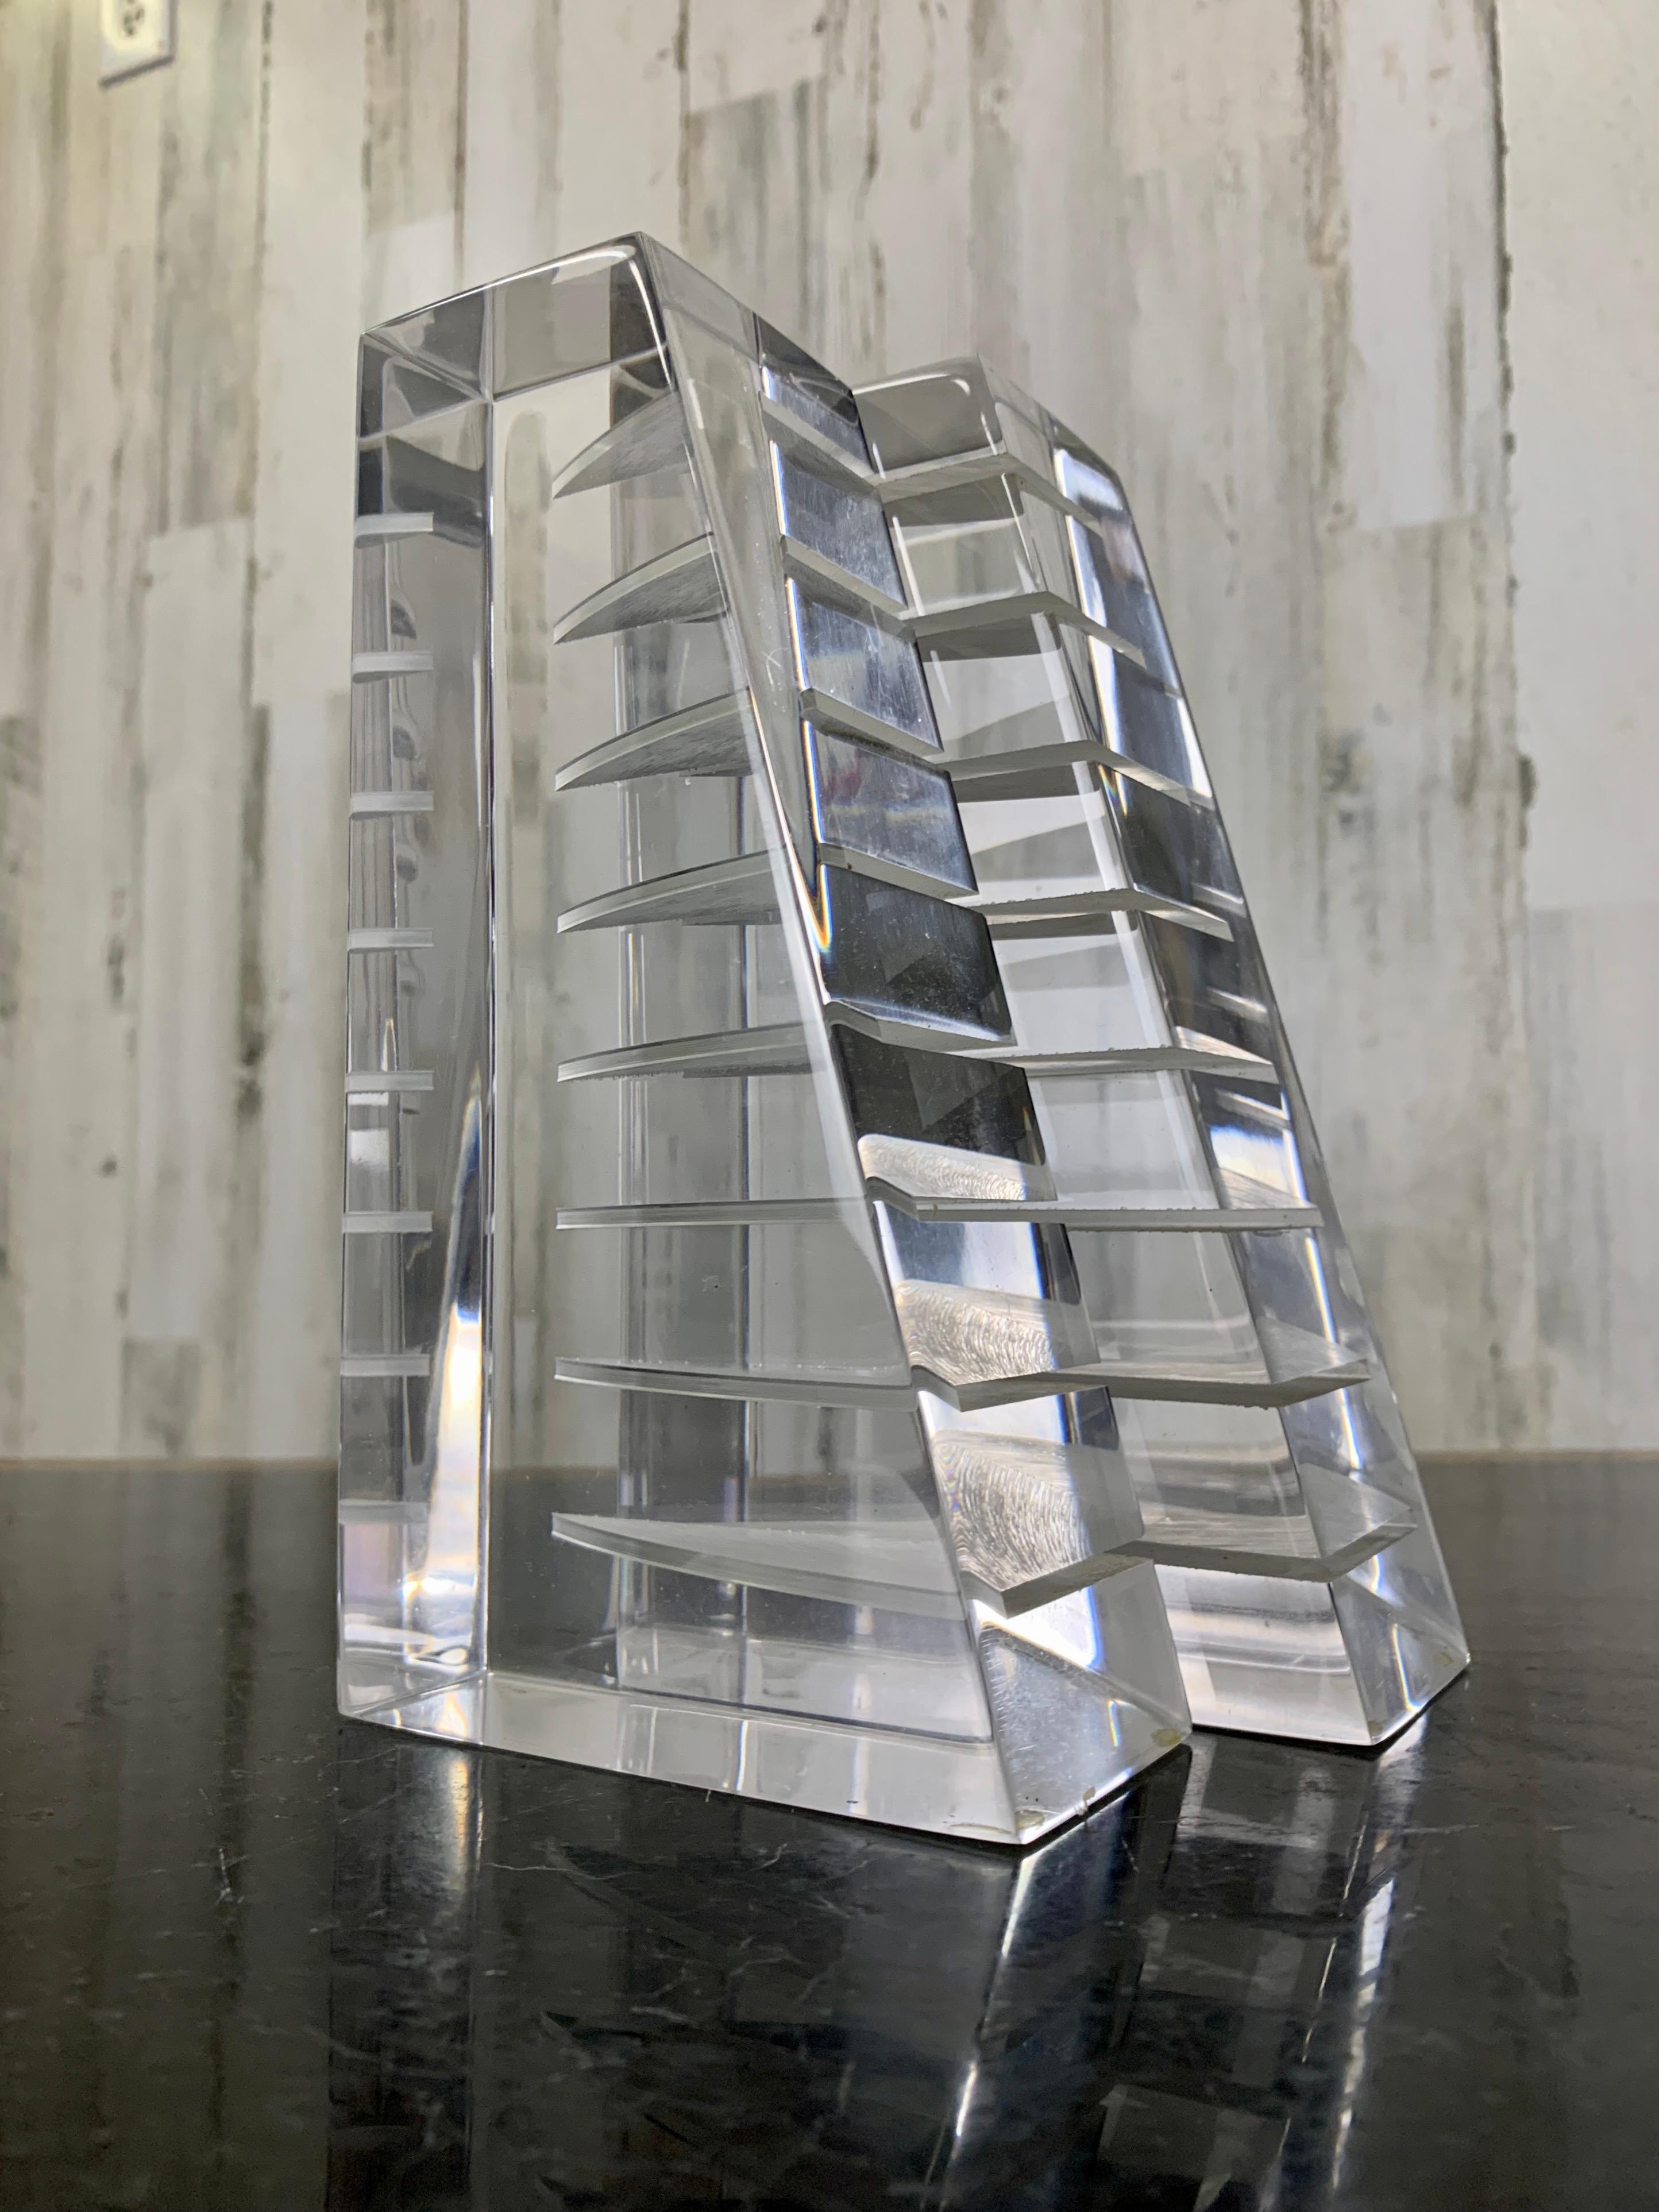 North American Lucite Bookends by Herb Ritts for Astrolite